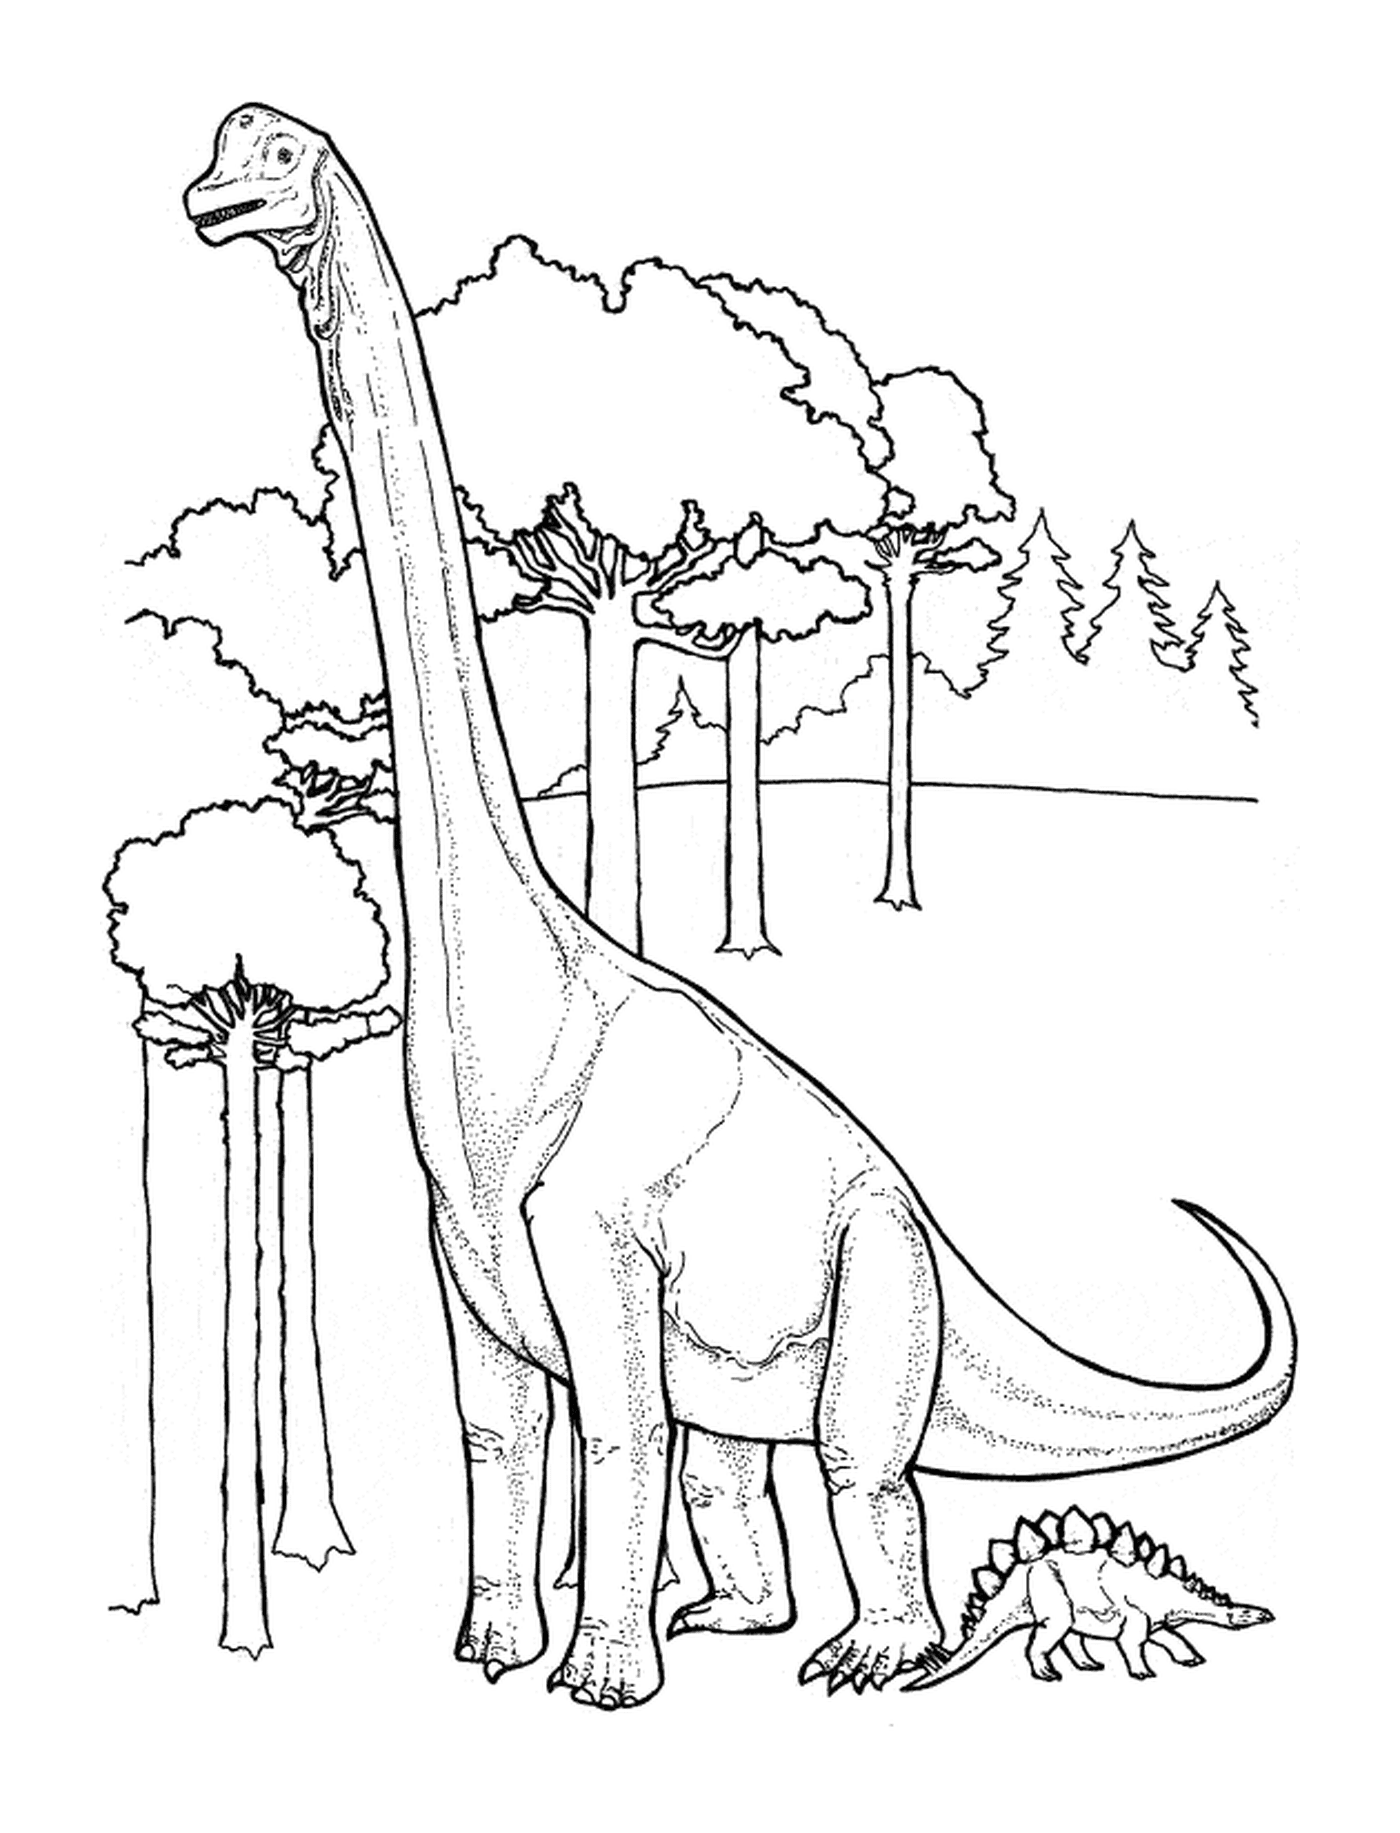  Dinosaur standing in a lush forest 